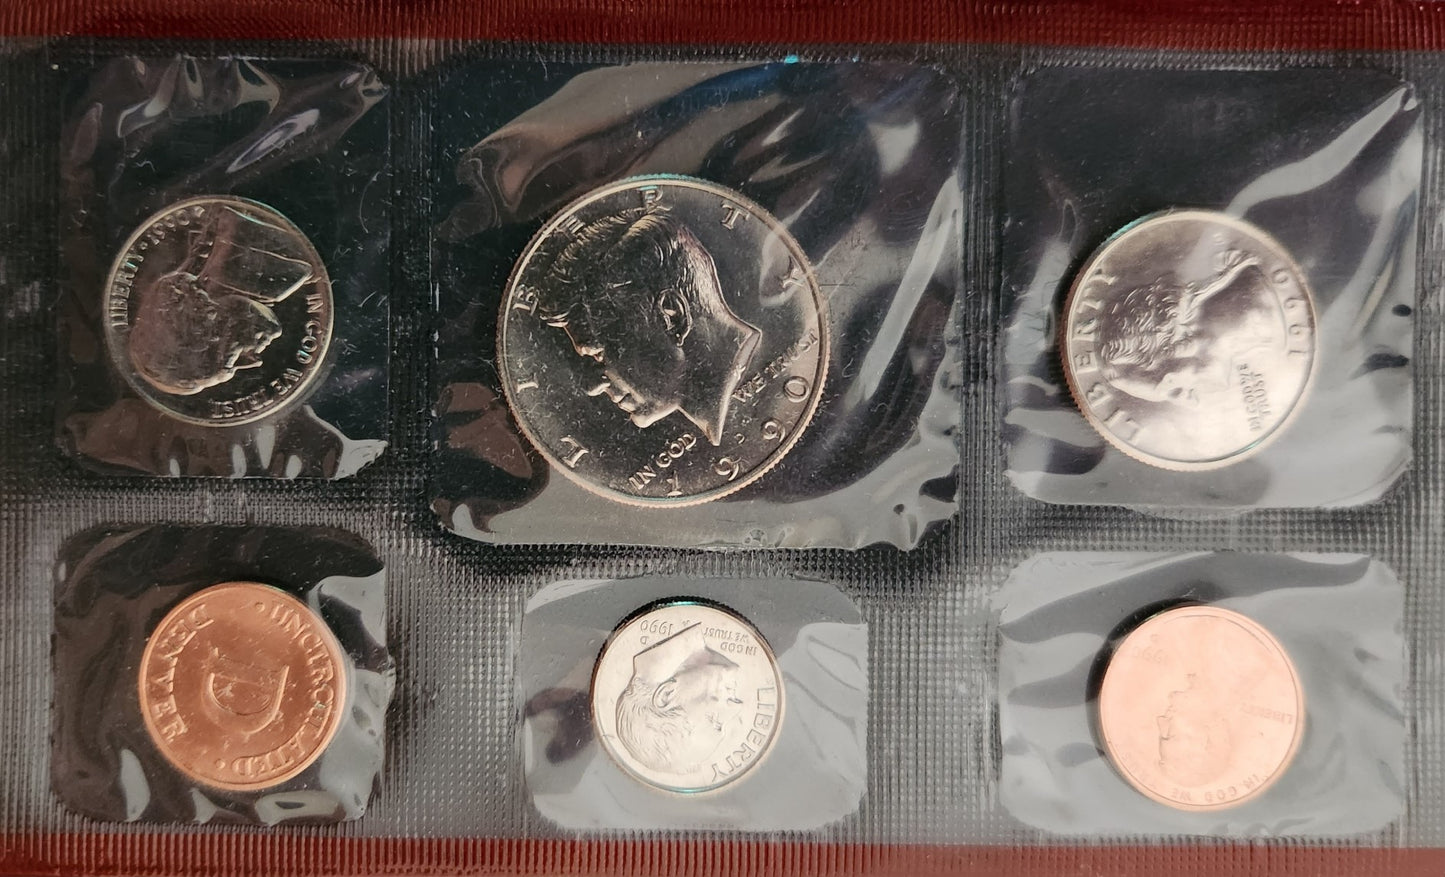 1990 United States Proof Set - With D and P Mint Marks